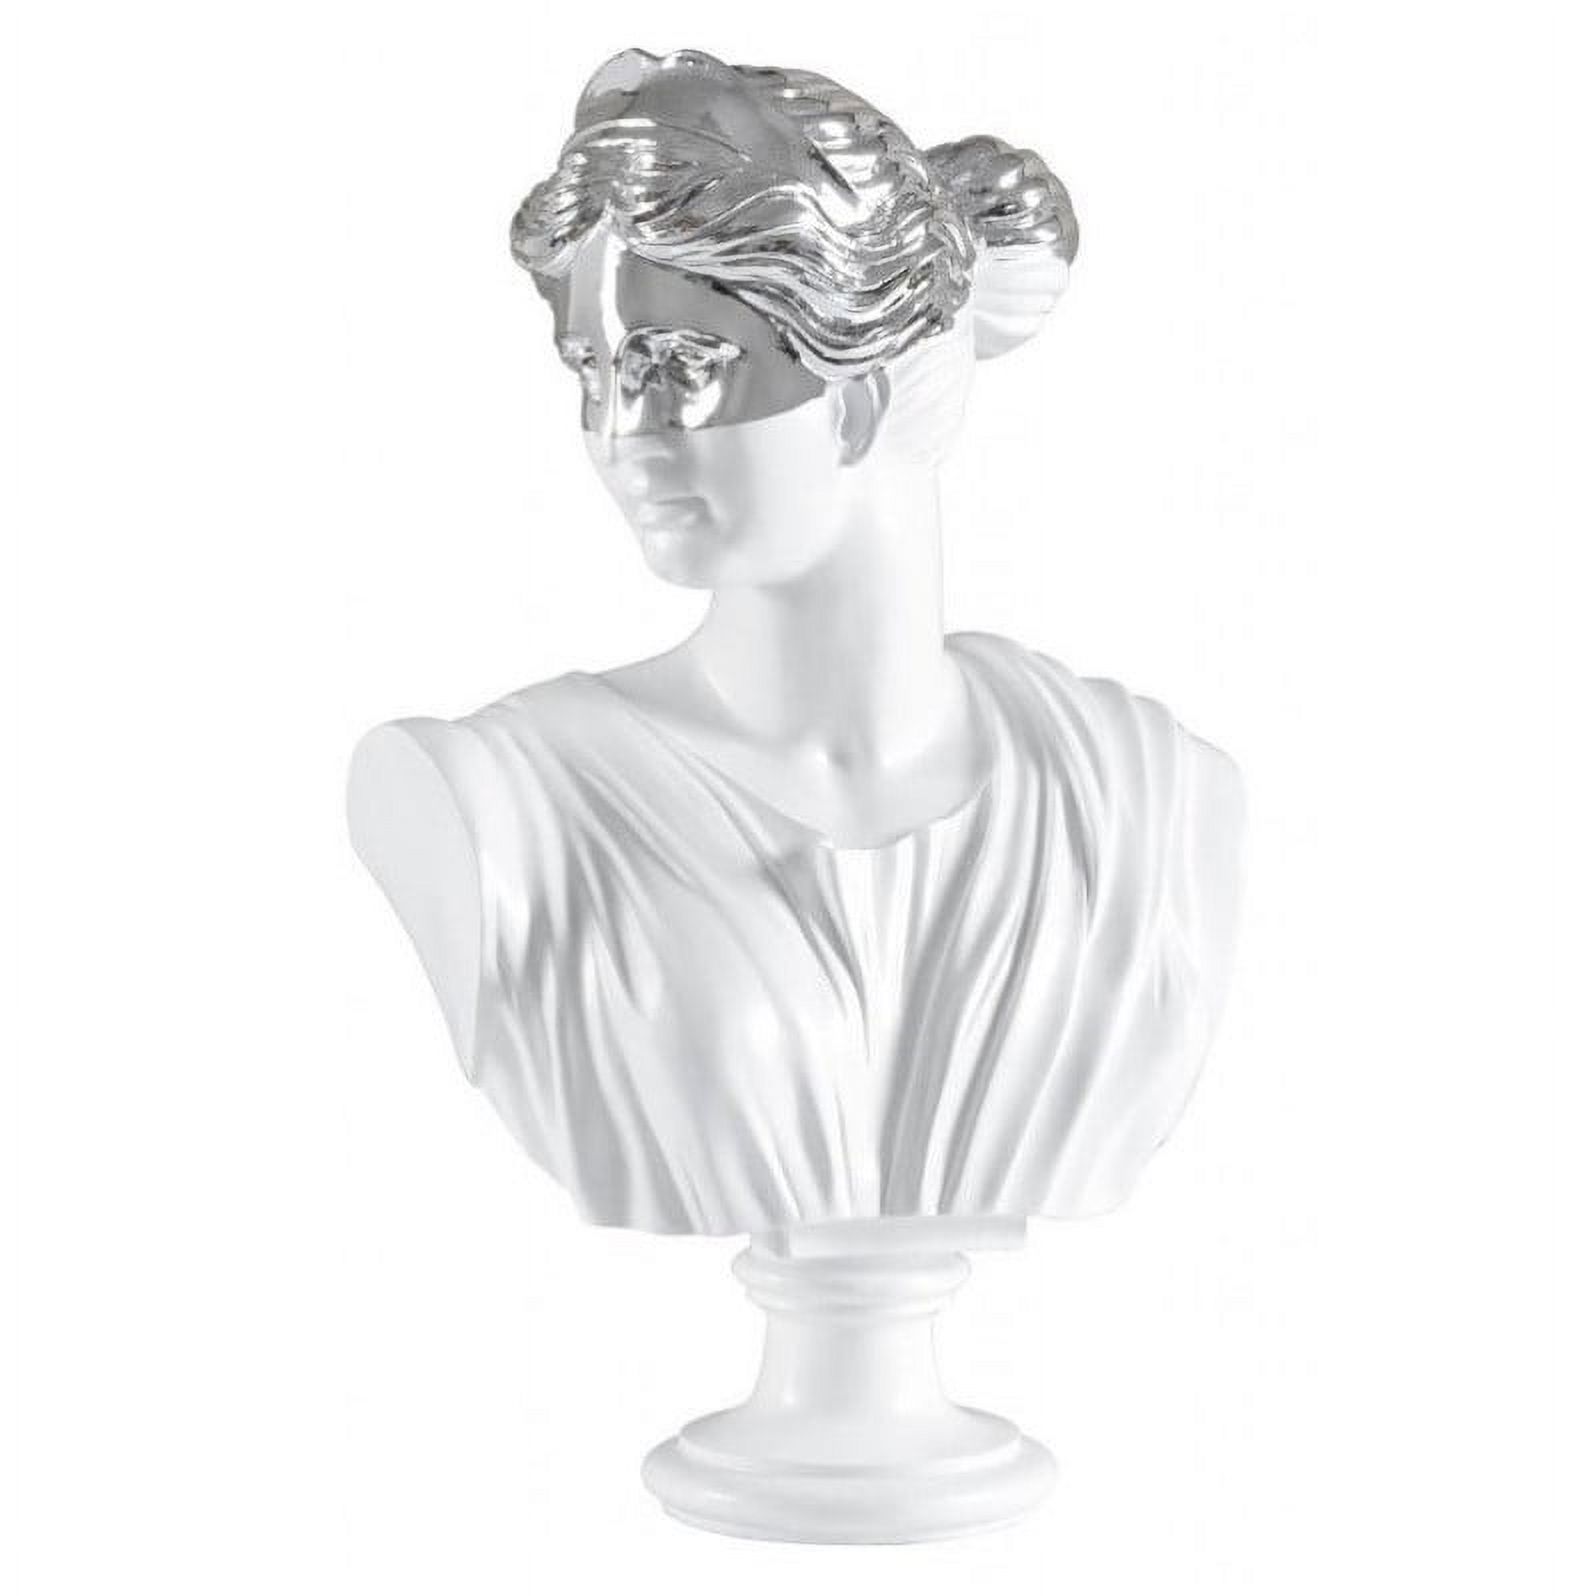 Renwil Juliett Bust Statue in Silver and Matte White - image 1 of 2